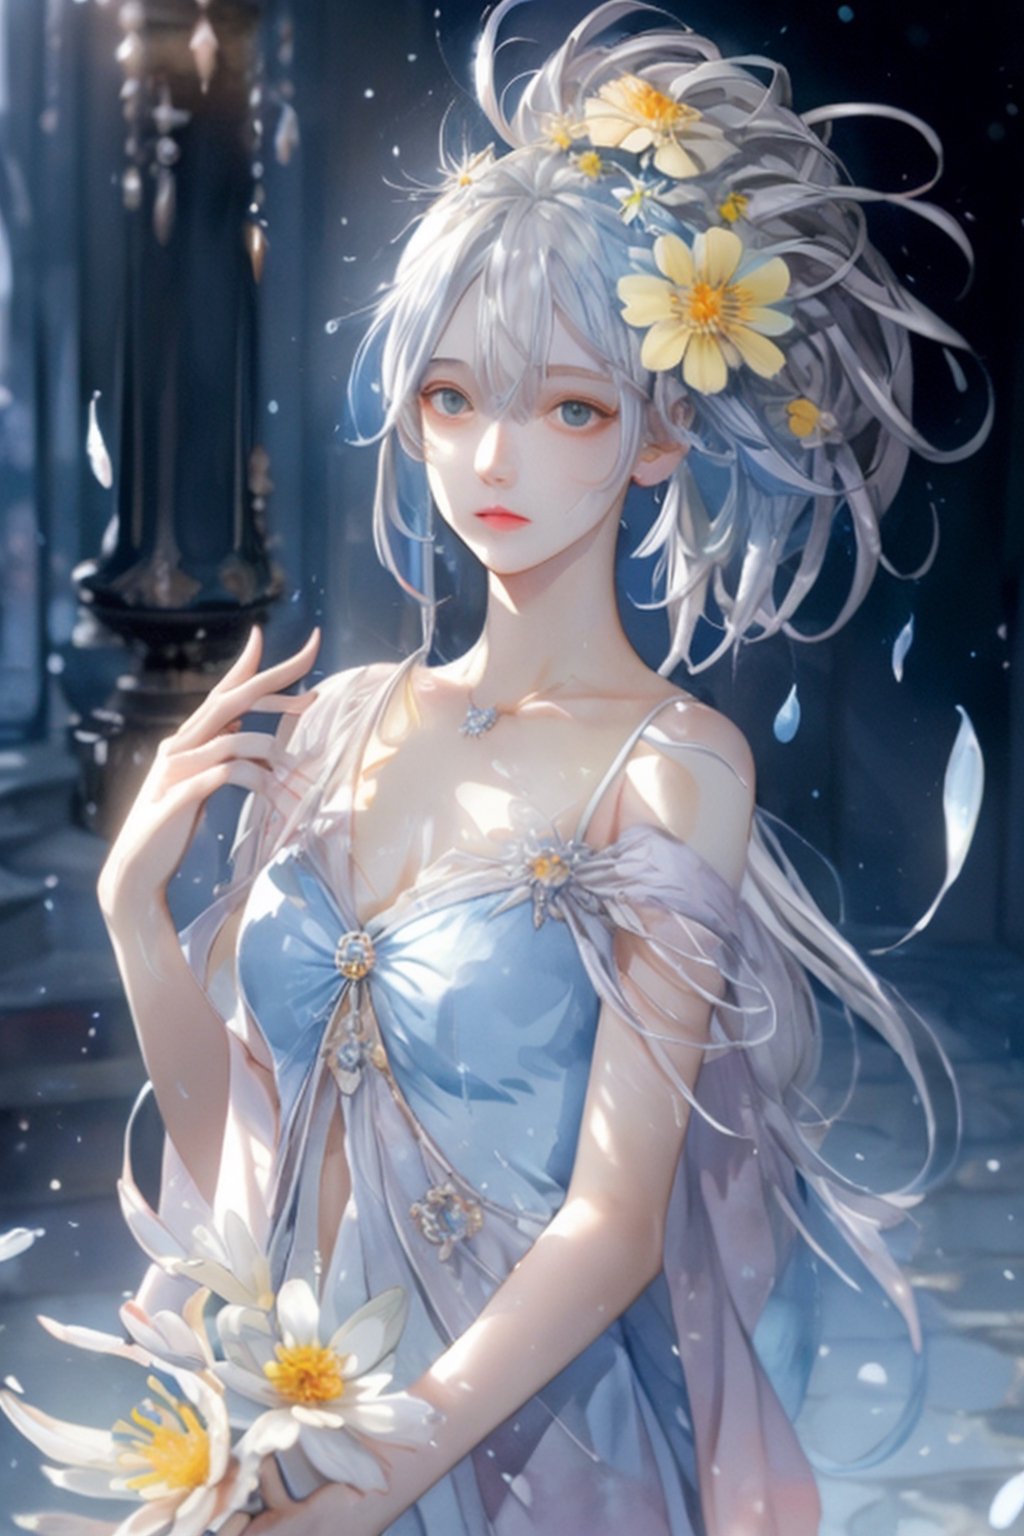 Watercolor painting, (Beautifully Aesthetic:1.2), (1girl:1.3), (colorful hair, Half blue and half grey hair:1.2), water, liquid, natta, colorful, Orange and yellow anemone flowers bloom around, Anemone blooming on the head, beautiful night, Starry sky, It's raining, Sateen, Fantastic night out,watercolor
,1 girl,midjourney,yuzu